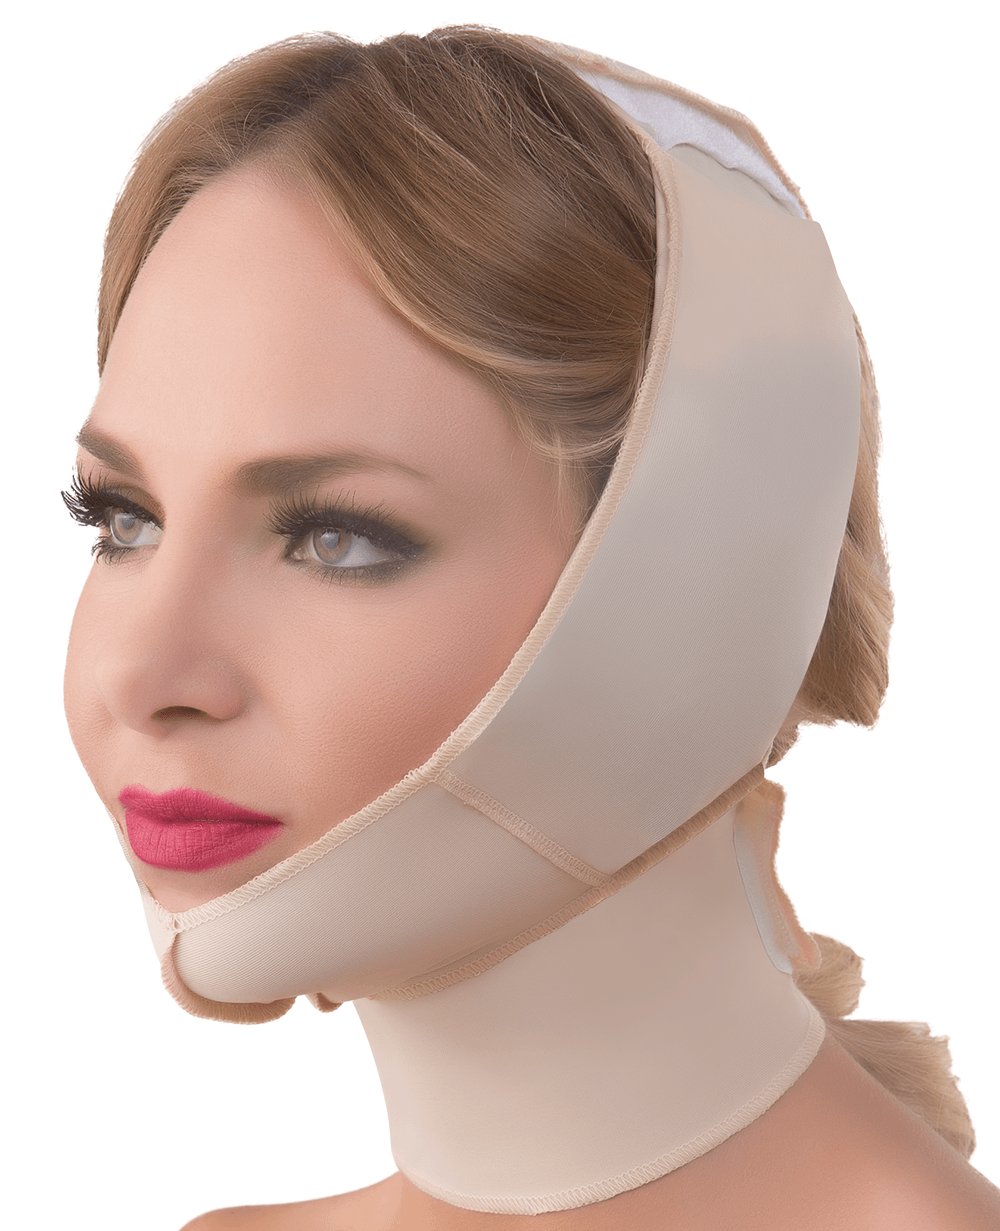 Isavela Compression Facial Garments - Unisex - JD Healthcare Group